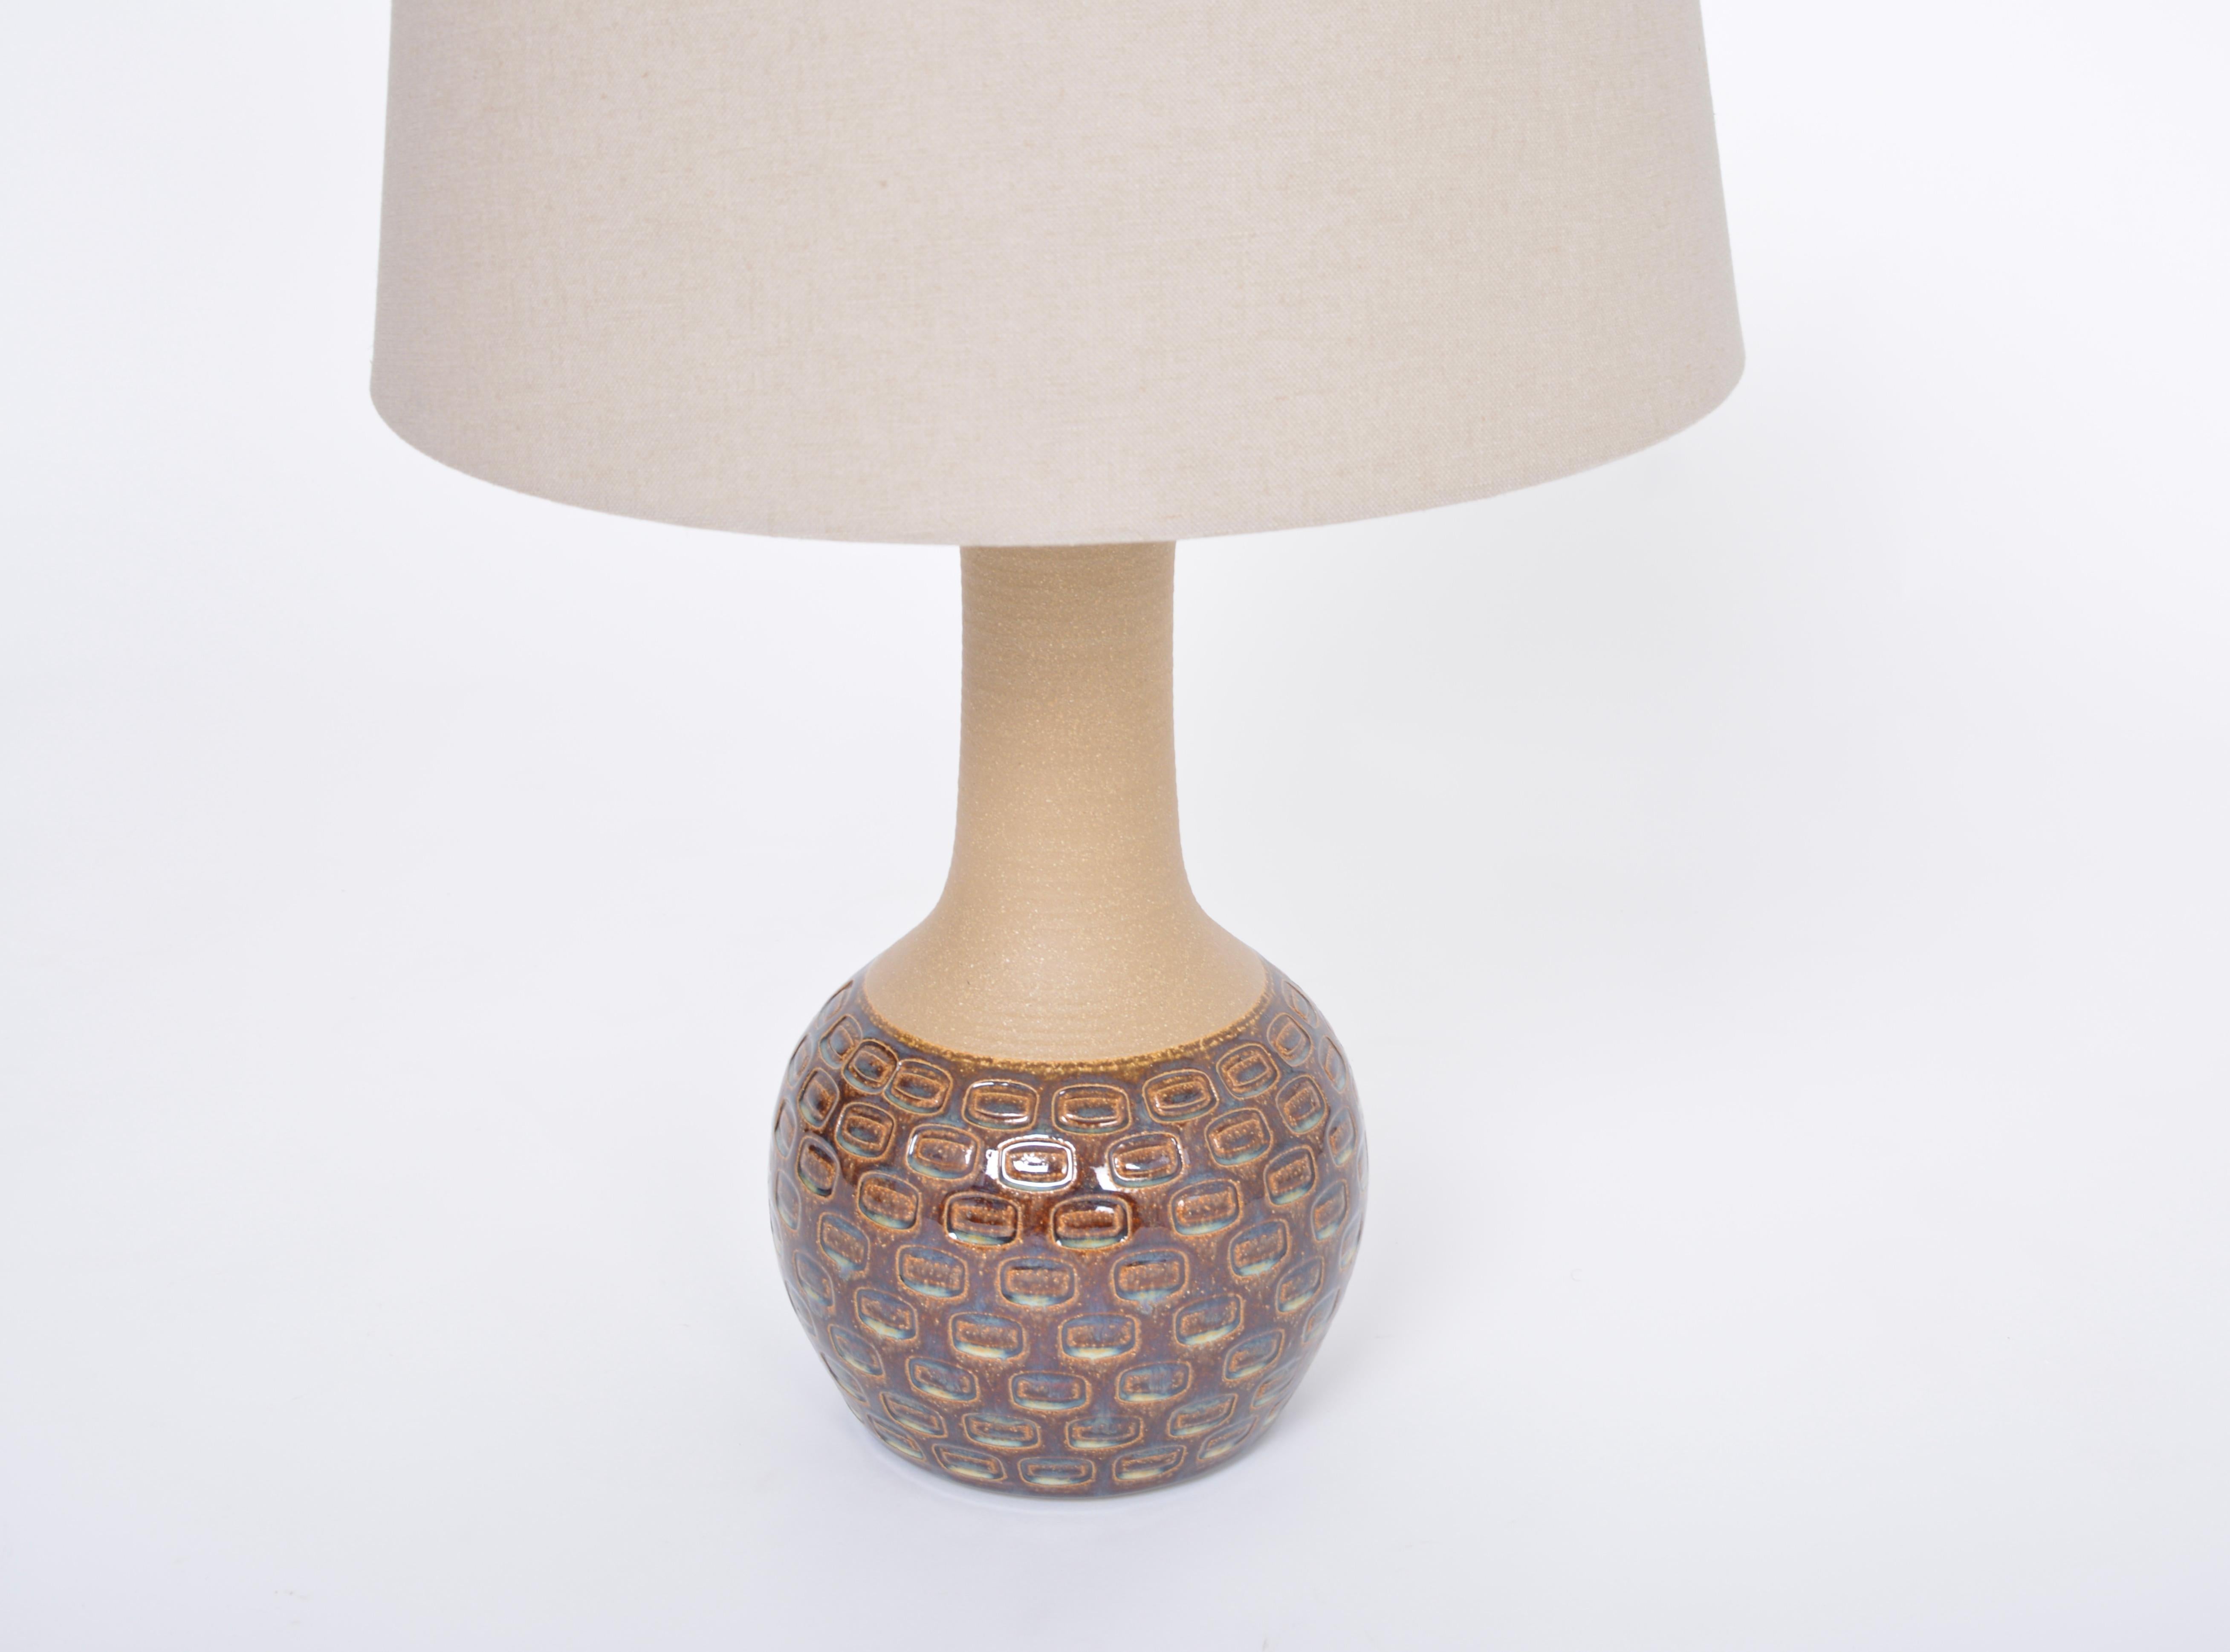 20th Century Handmade Danish Mid-Century Modern Stoneware Lamp with Graphic Pattern by Soholm For Sale